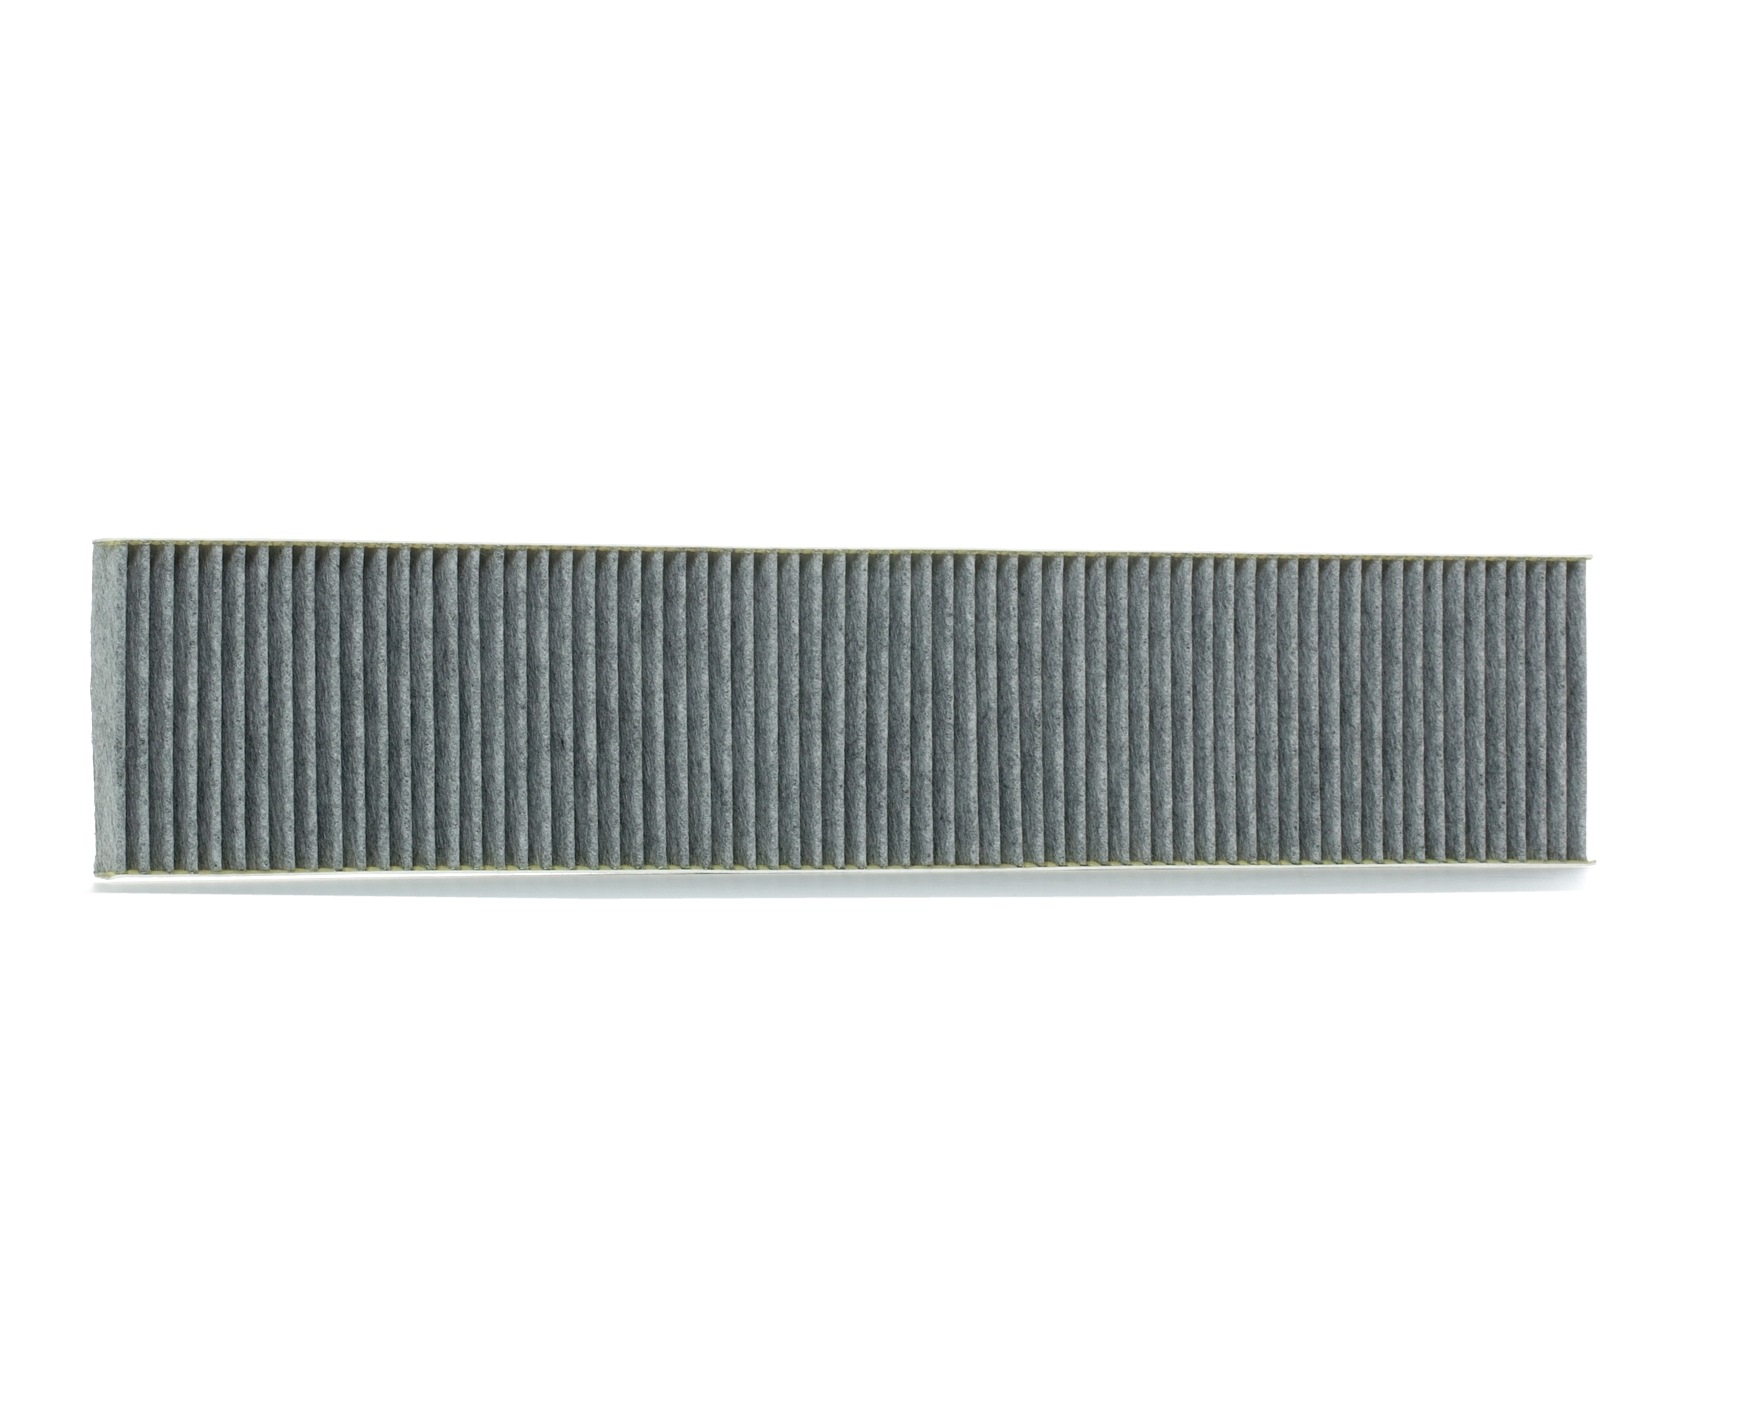 SIC1766 PURFLUX Activated Carbon Filter, 535 mm x 110 mm x 25 mm Width: 110mm, Height: 25mm, Length: 535mm Cabin filter AHC129 buy